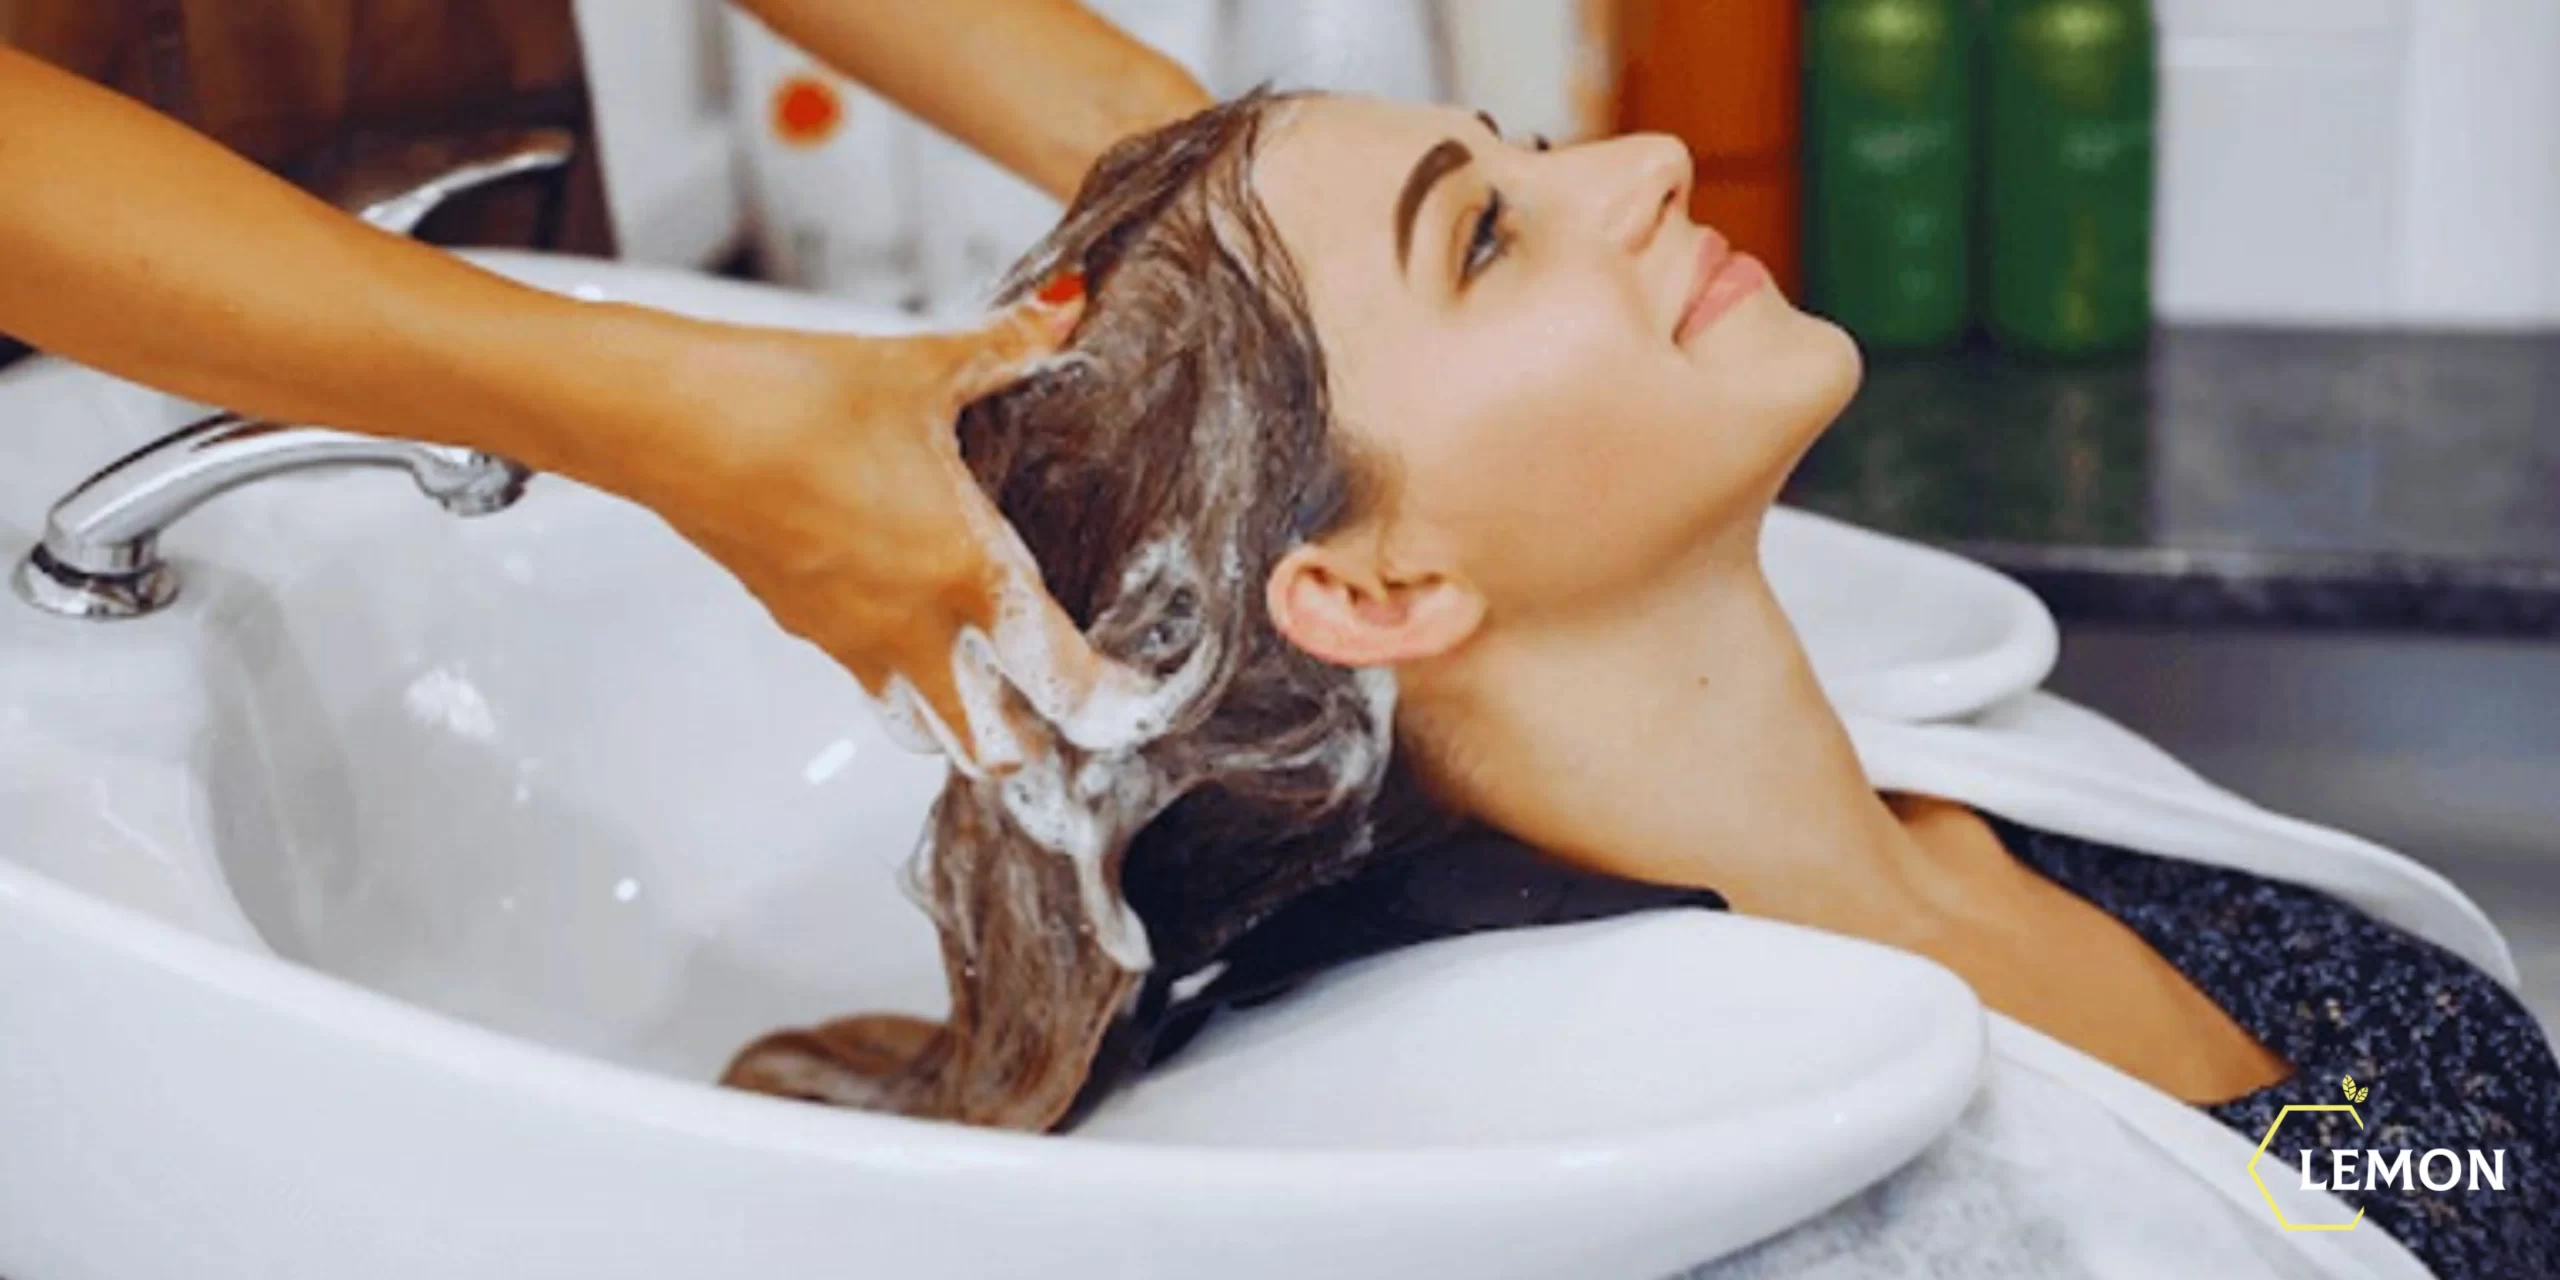 The Ultimate Hair Spa Experience at Lemon Salons